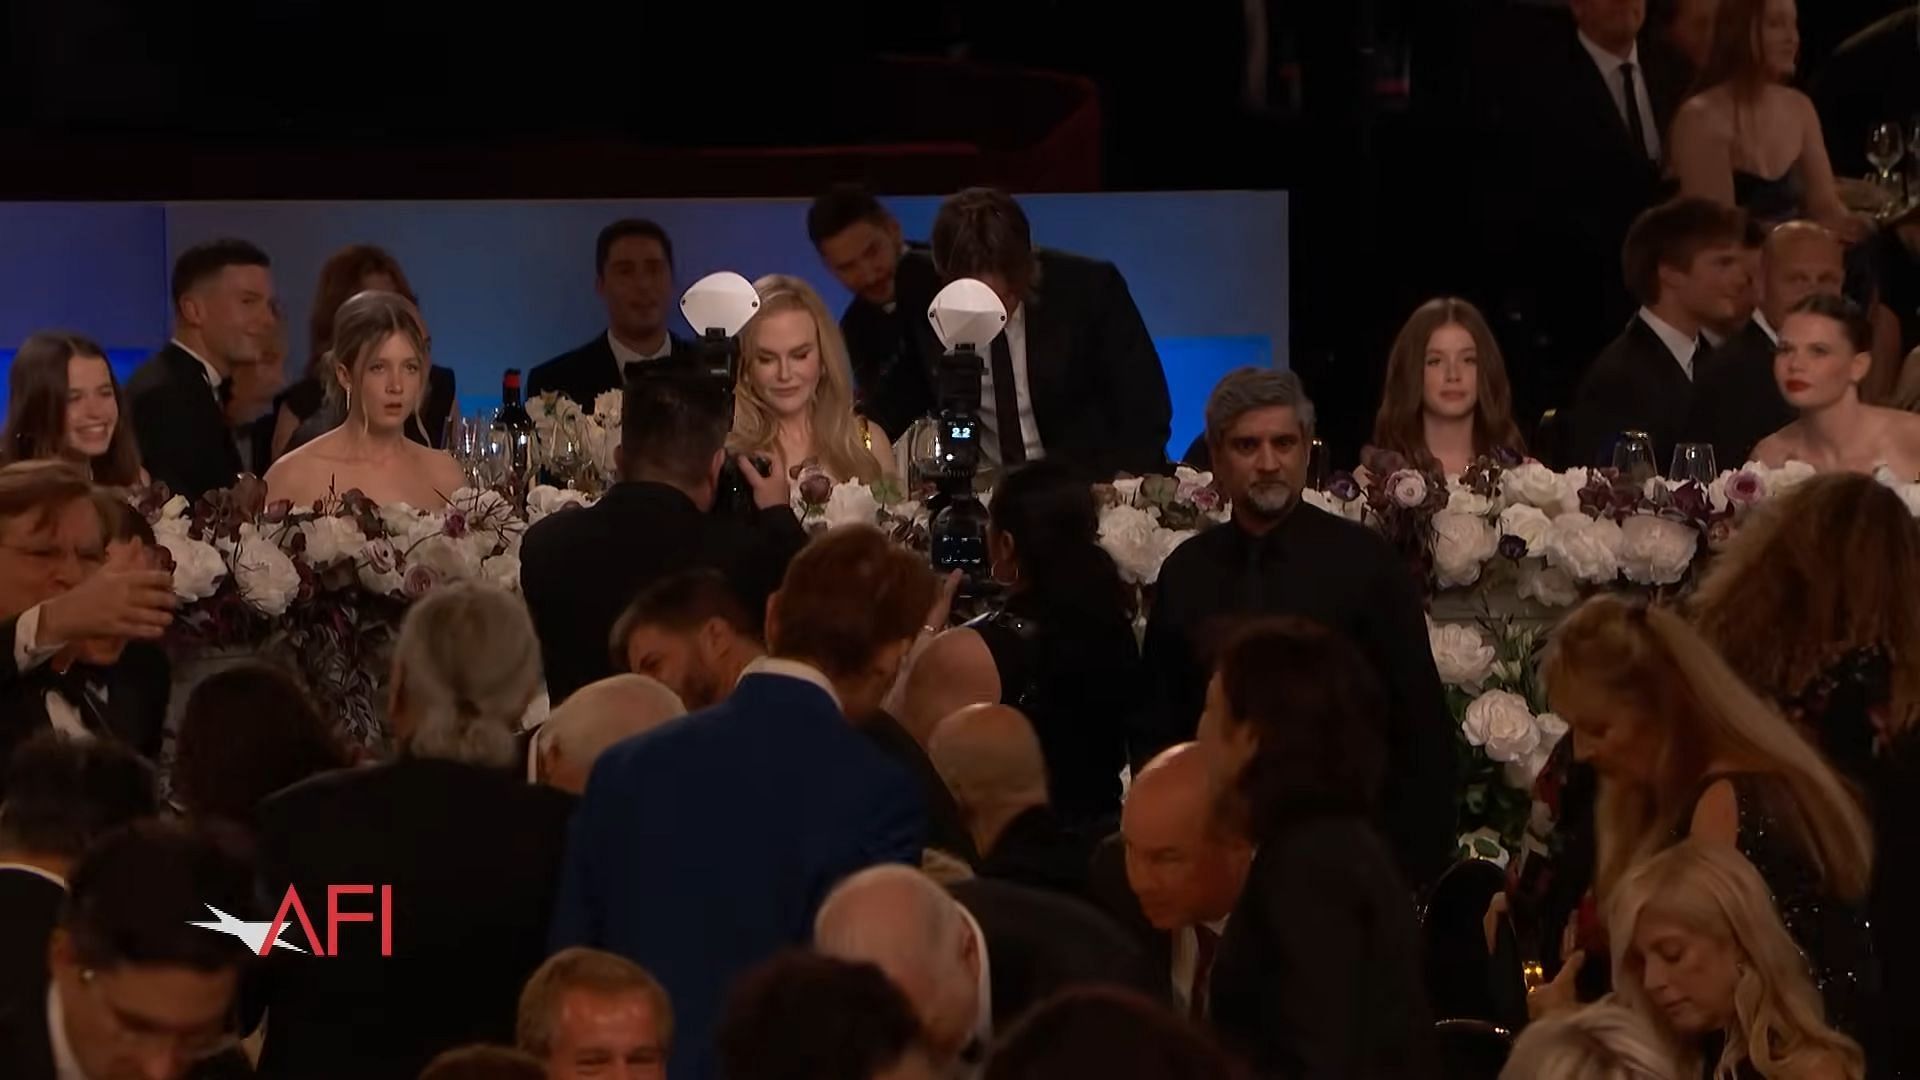 Kidman was joined by her daughters at the ceremony (Image via YouTube/ @American Film Institute)